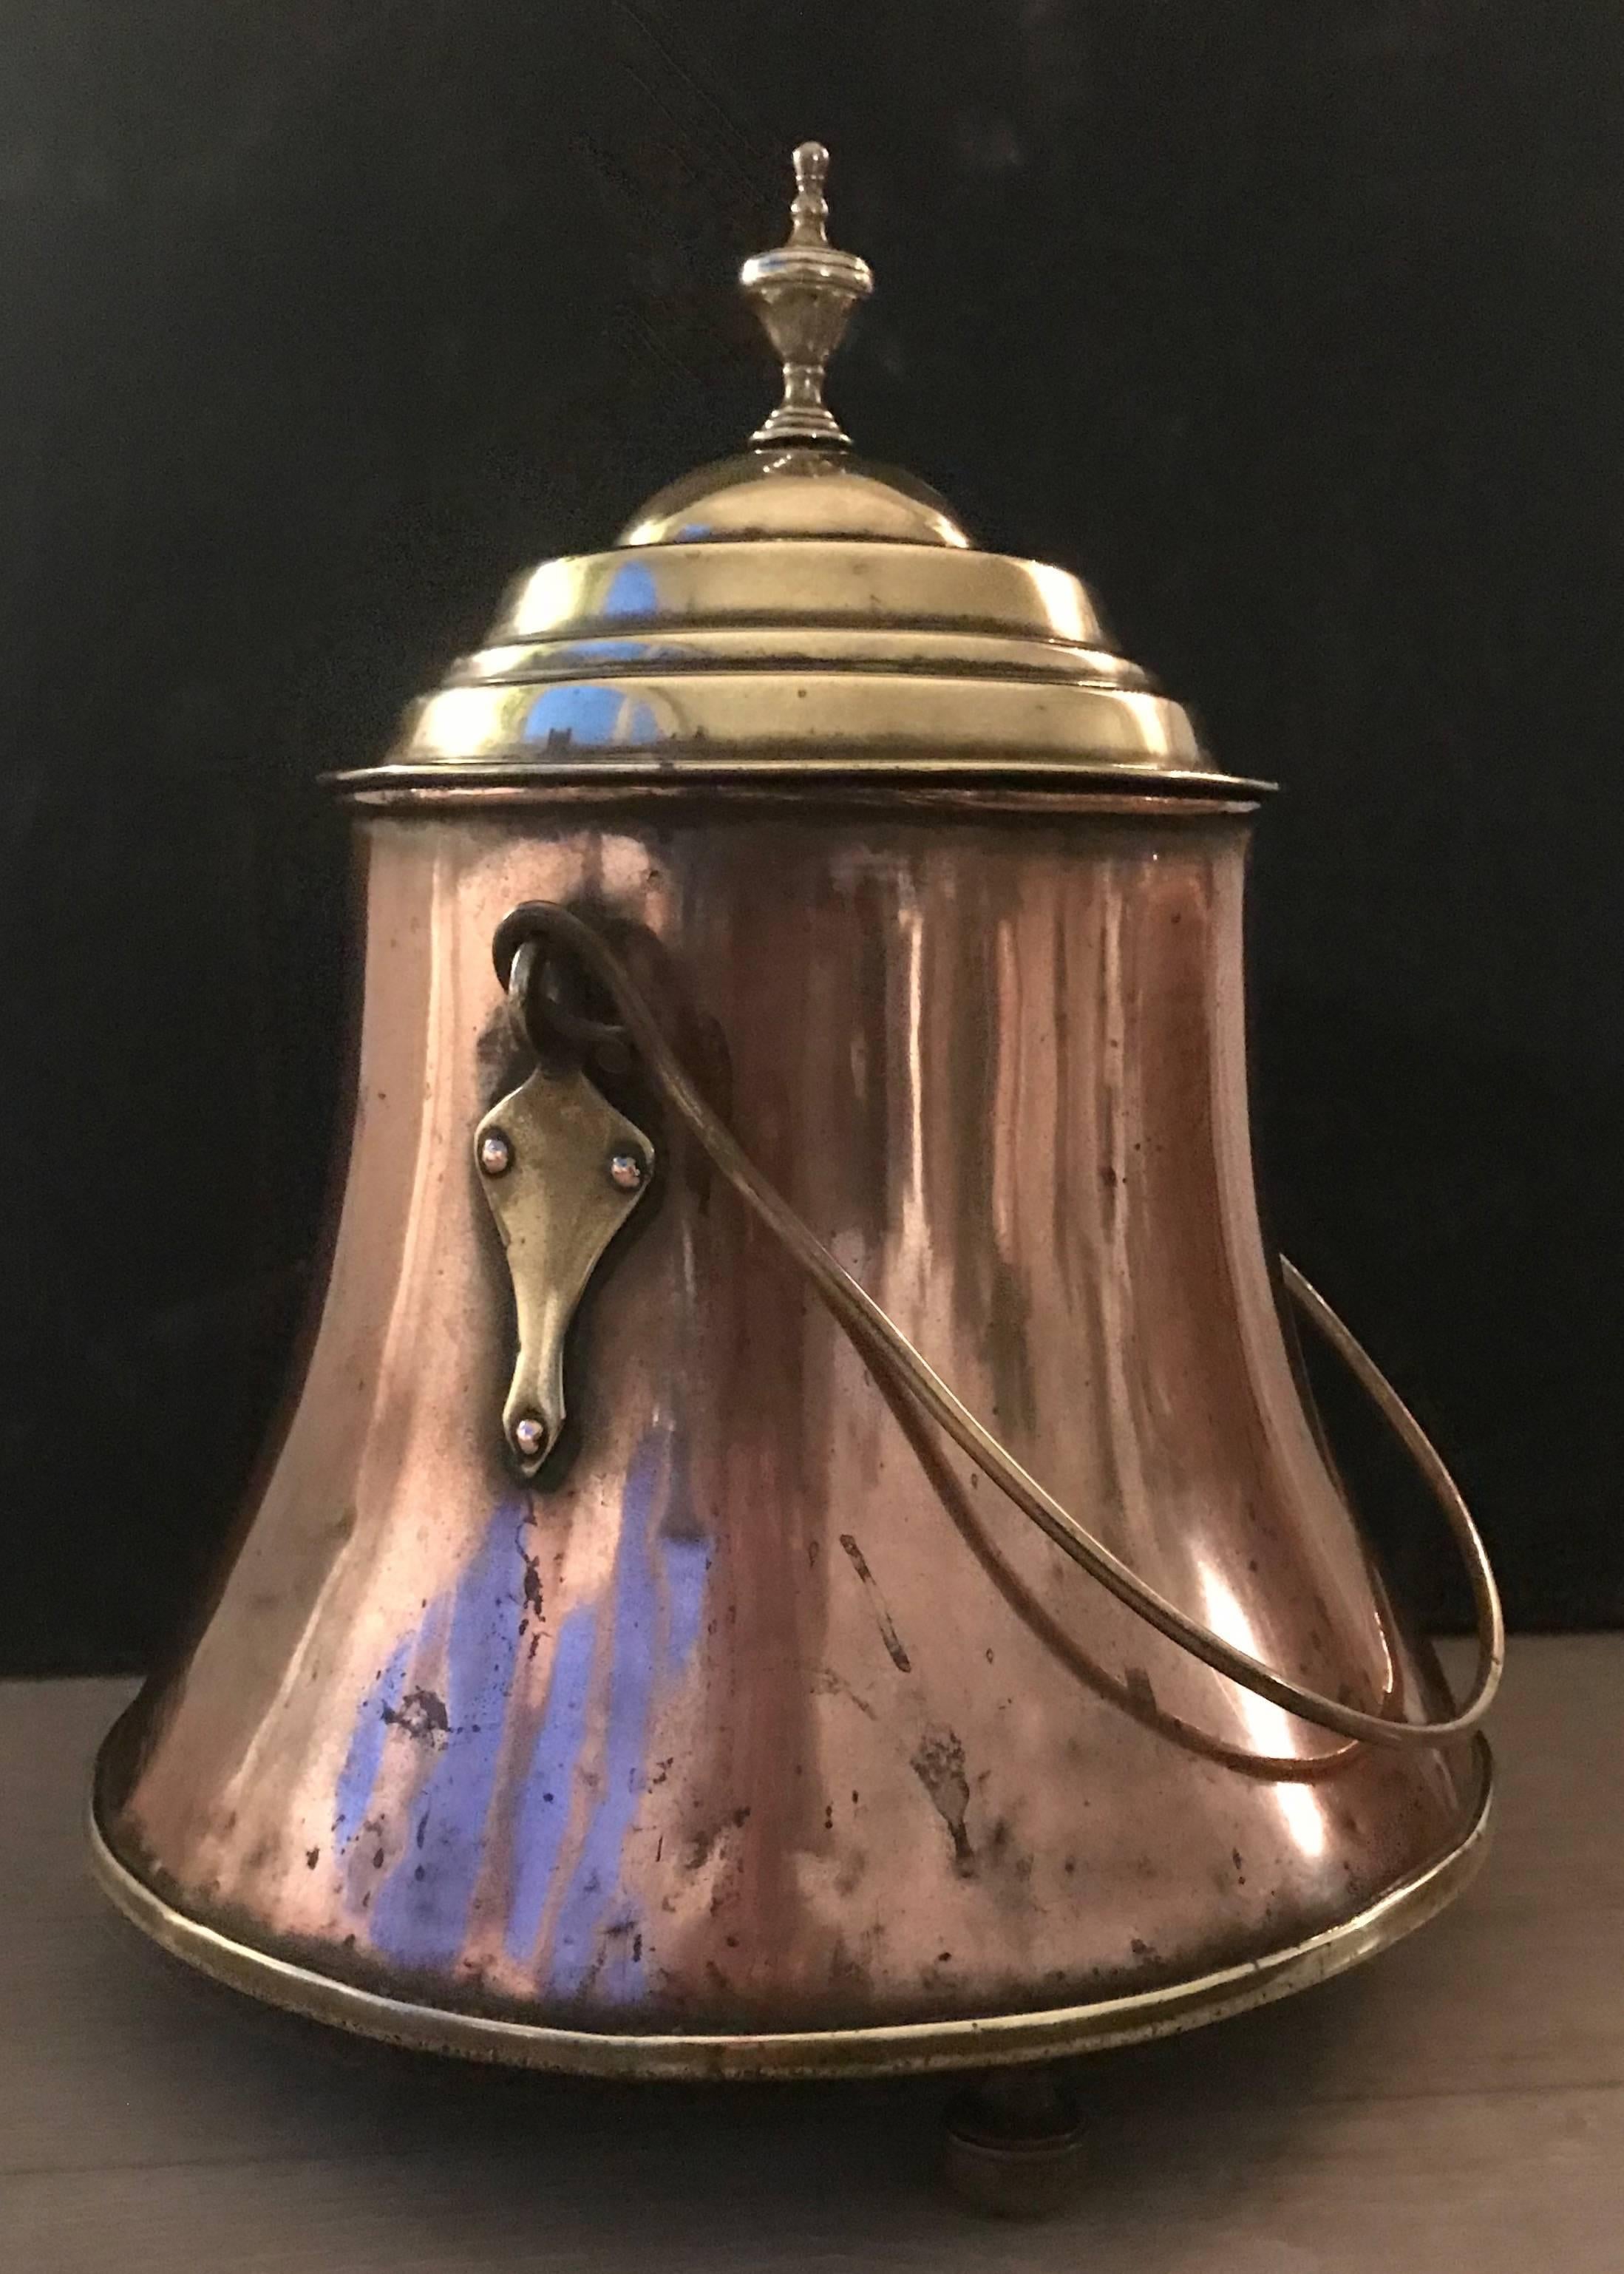 An elegant and very decorative, early 1800's copper fire place tool.

This hand-crafted, copper and brass kettle could only be afforded by the very well-to-do in the 1800's in Europe and in the  Netherlands in particular. It would have taken a